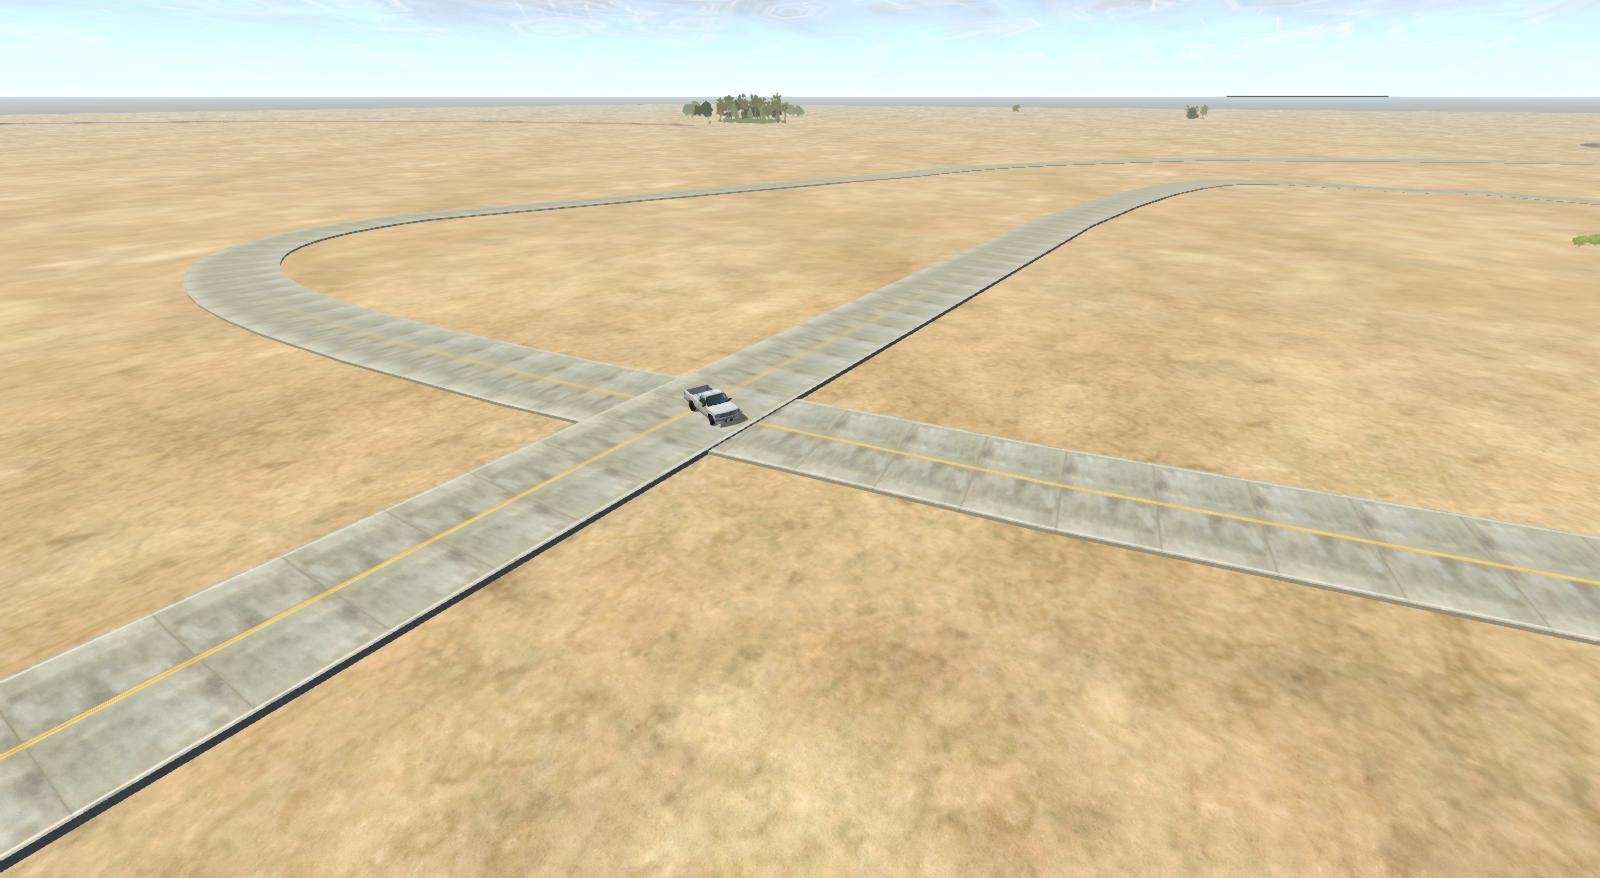 maps in beamng drive